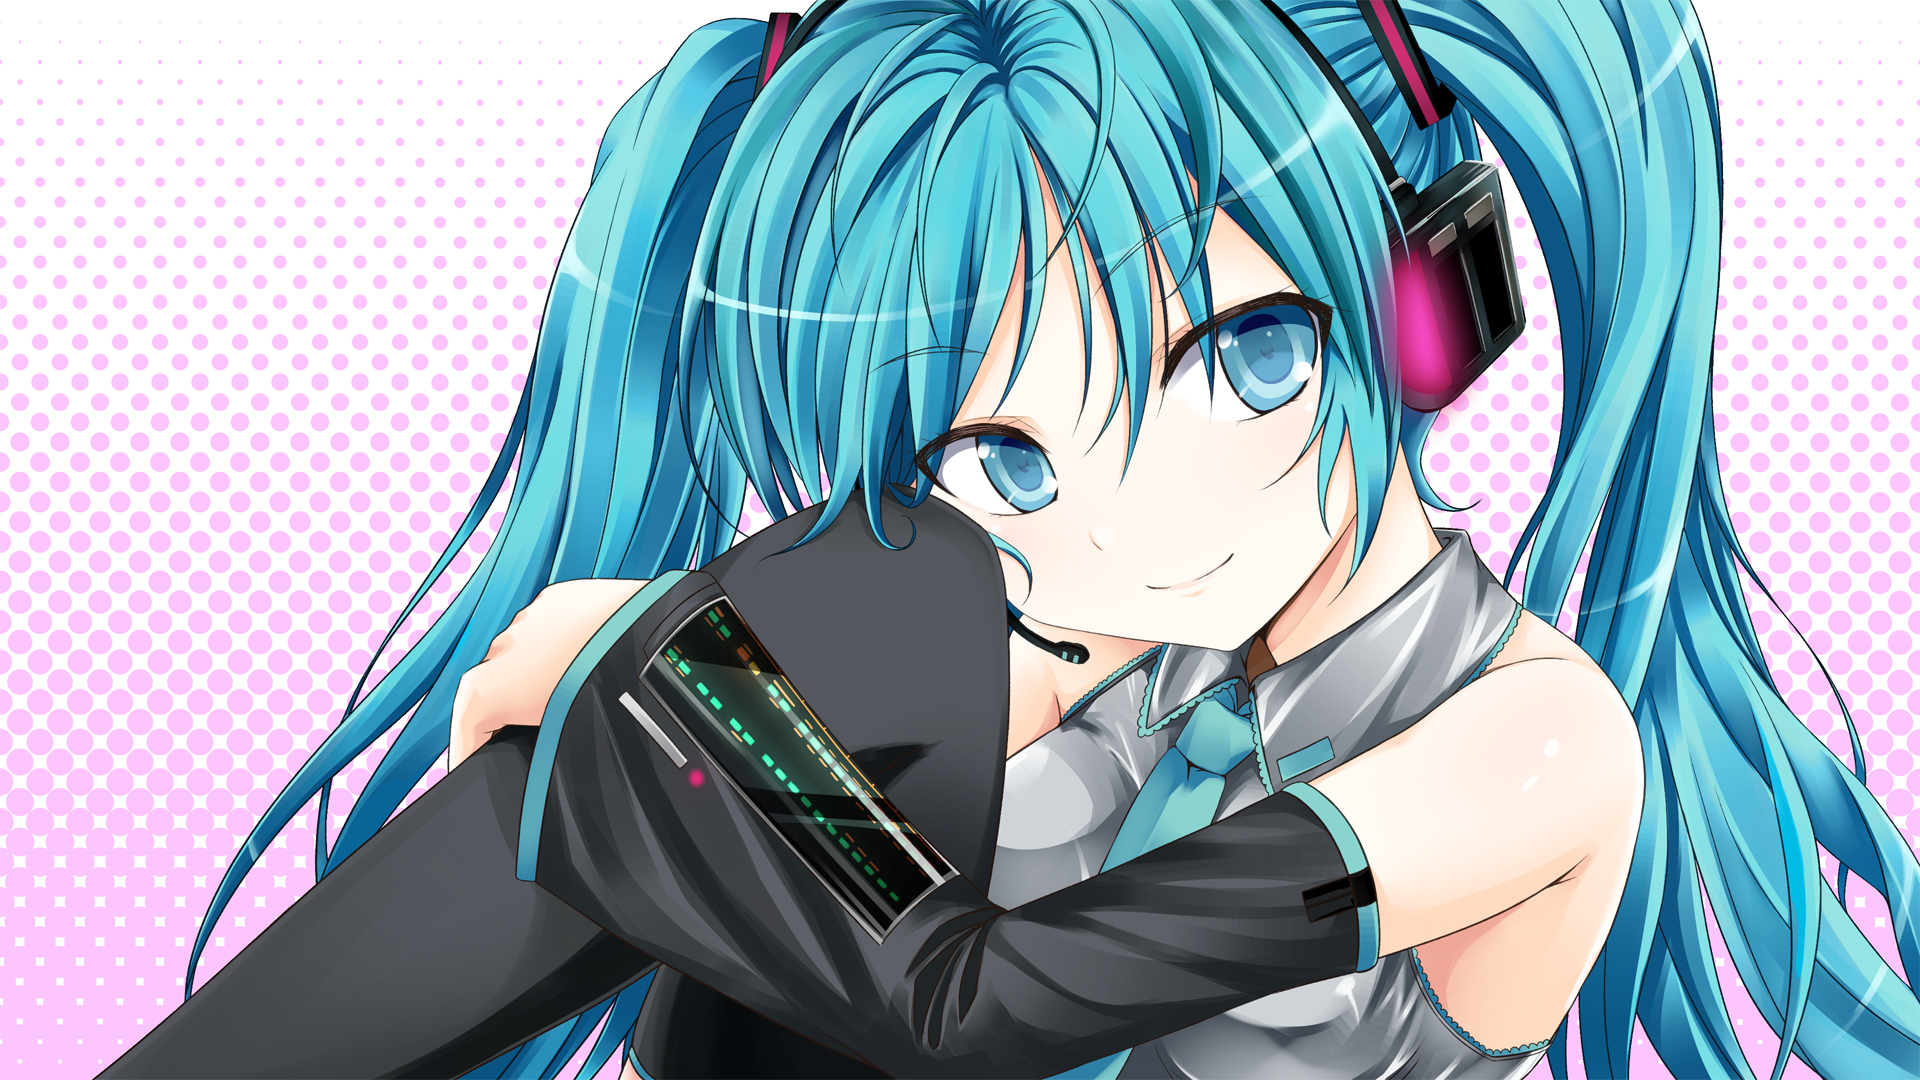 Anime school girl with blue hair and headphones - wide 3